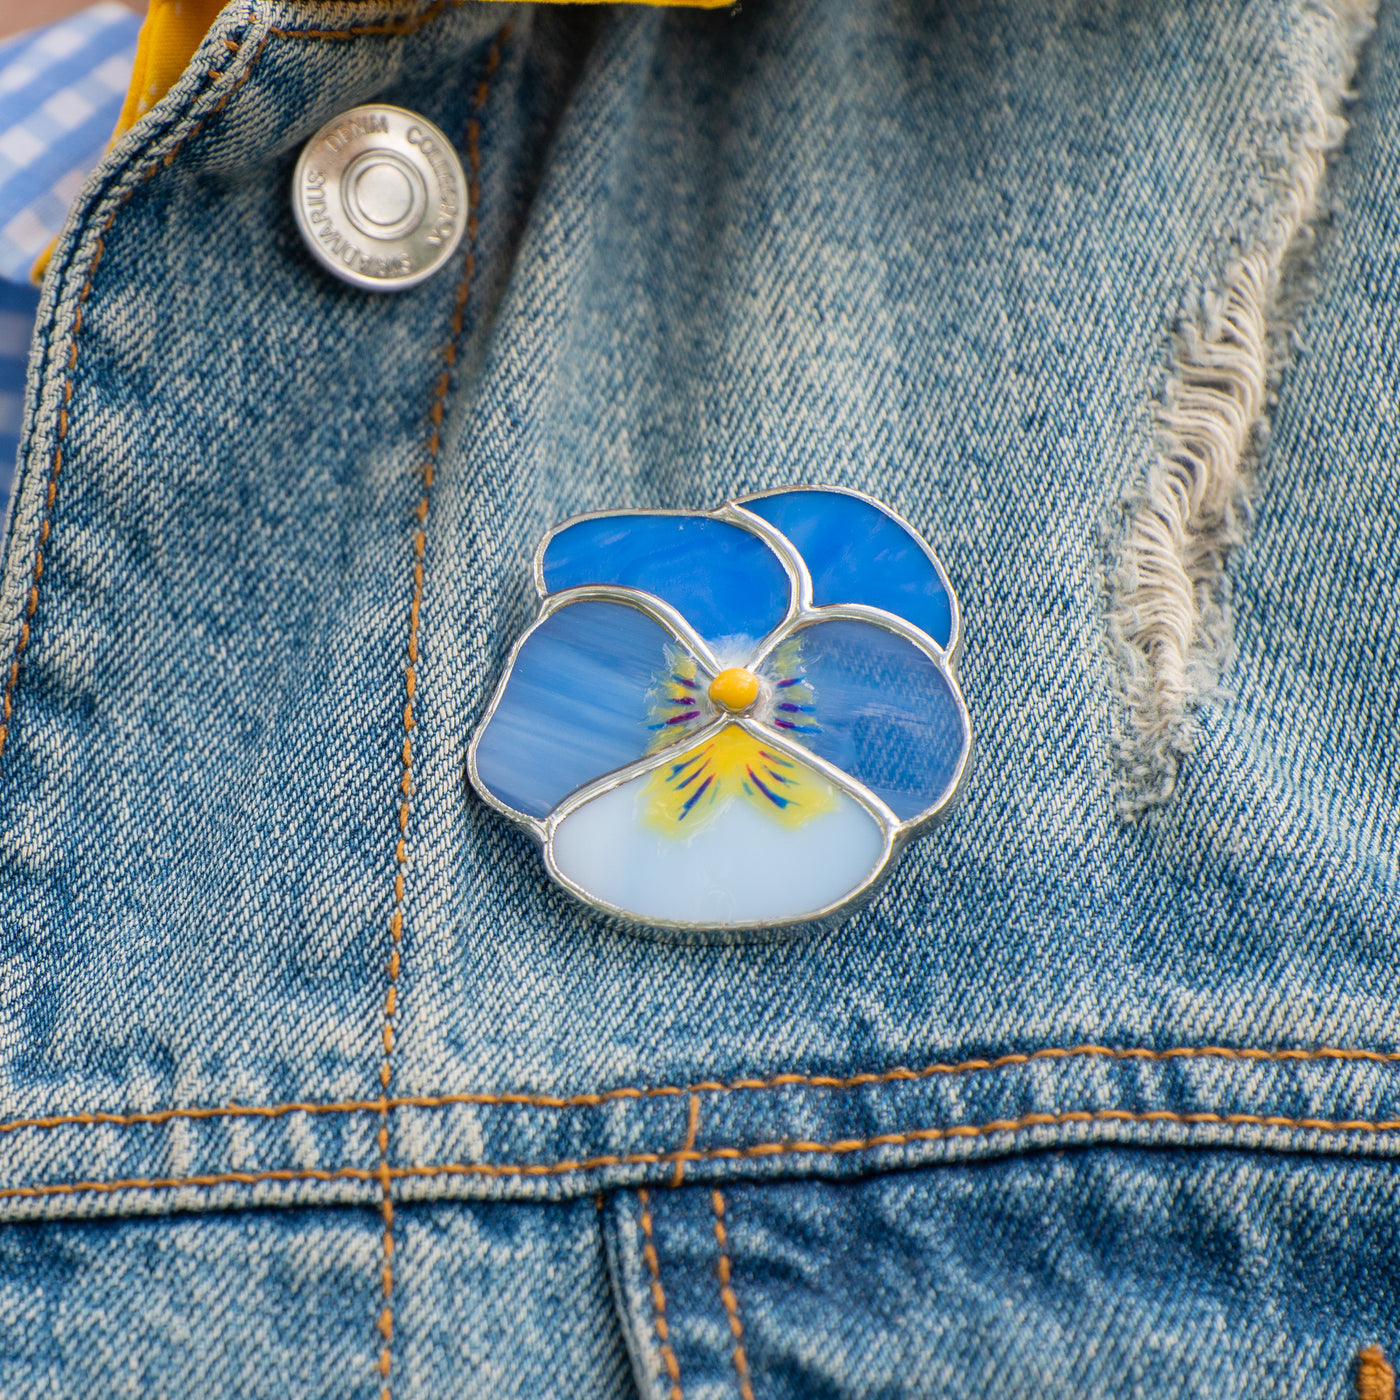 Stained glass blue pansy flower brooch on a jeans jacket